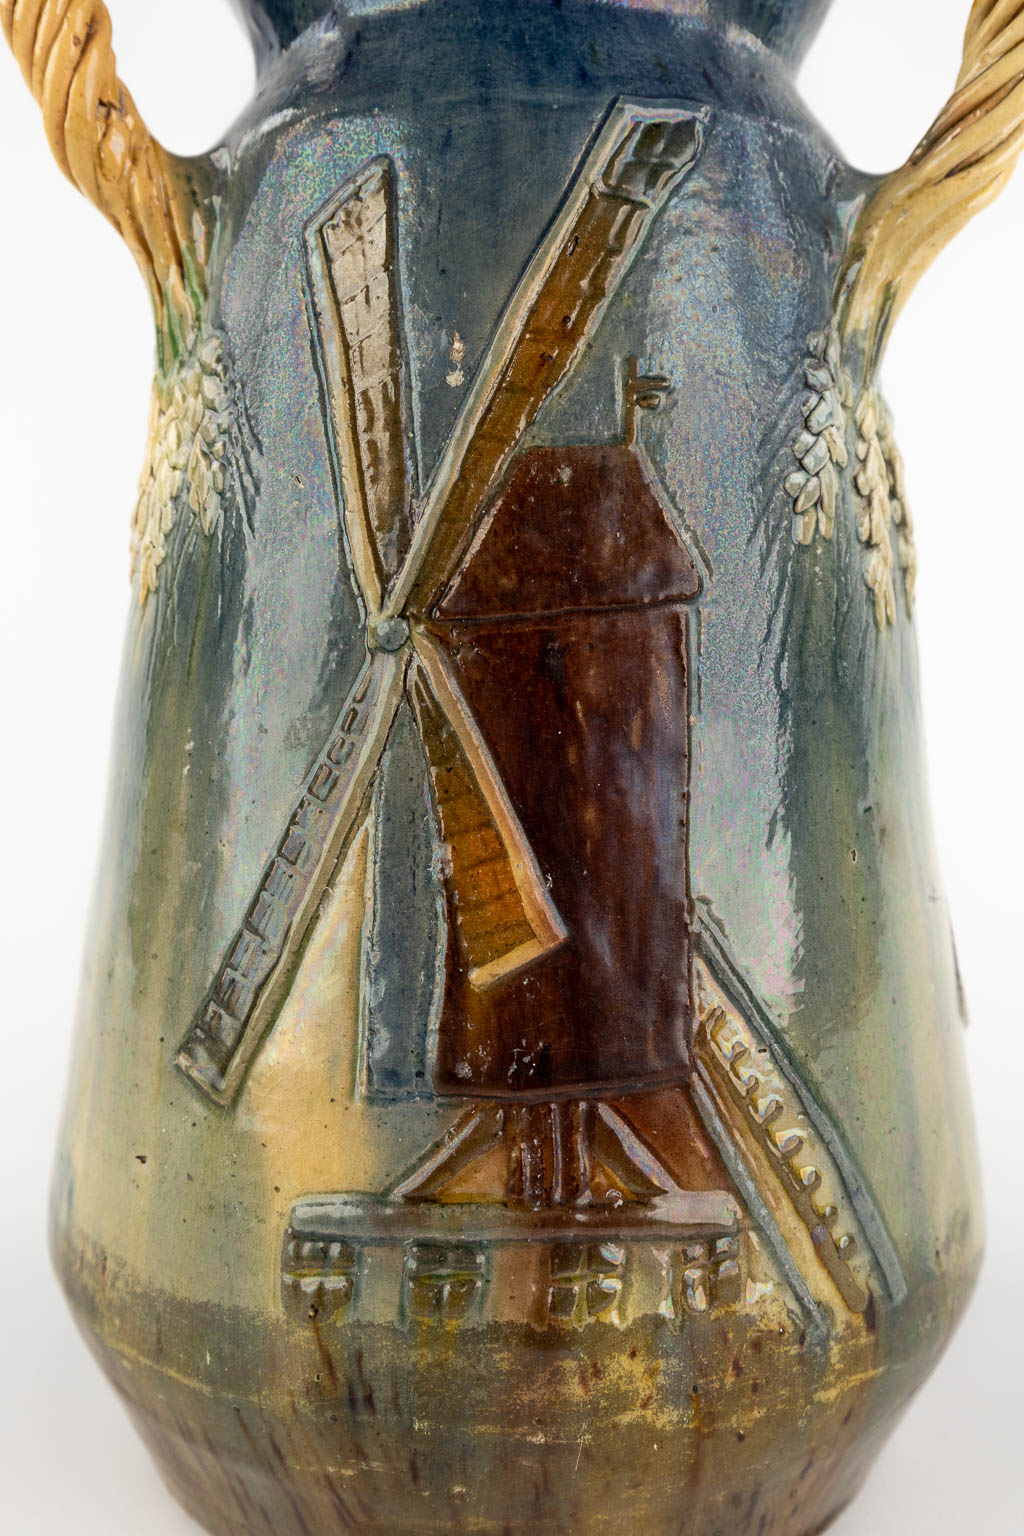 A vase, Flemish Earthenware, decorated with a windmill, Torhout. (H:31 x D:18 cm)